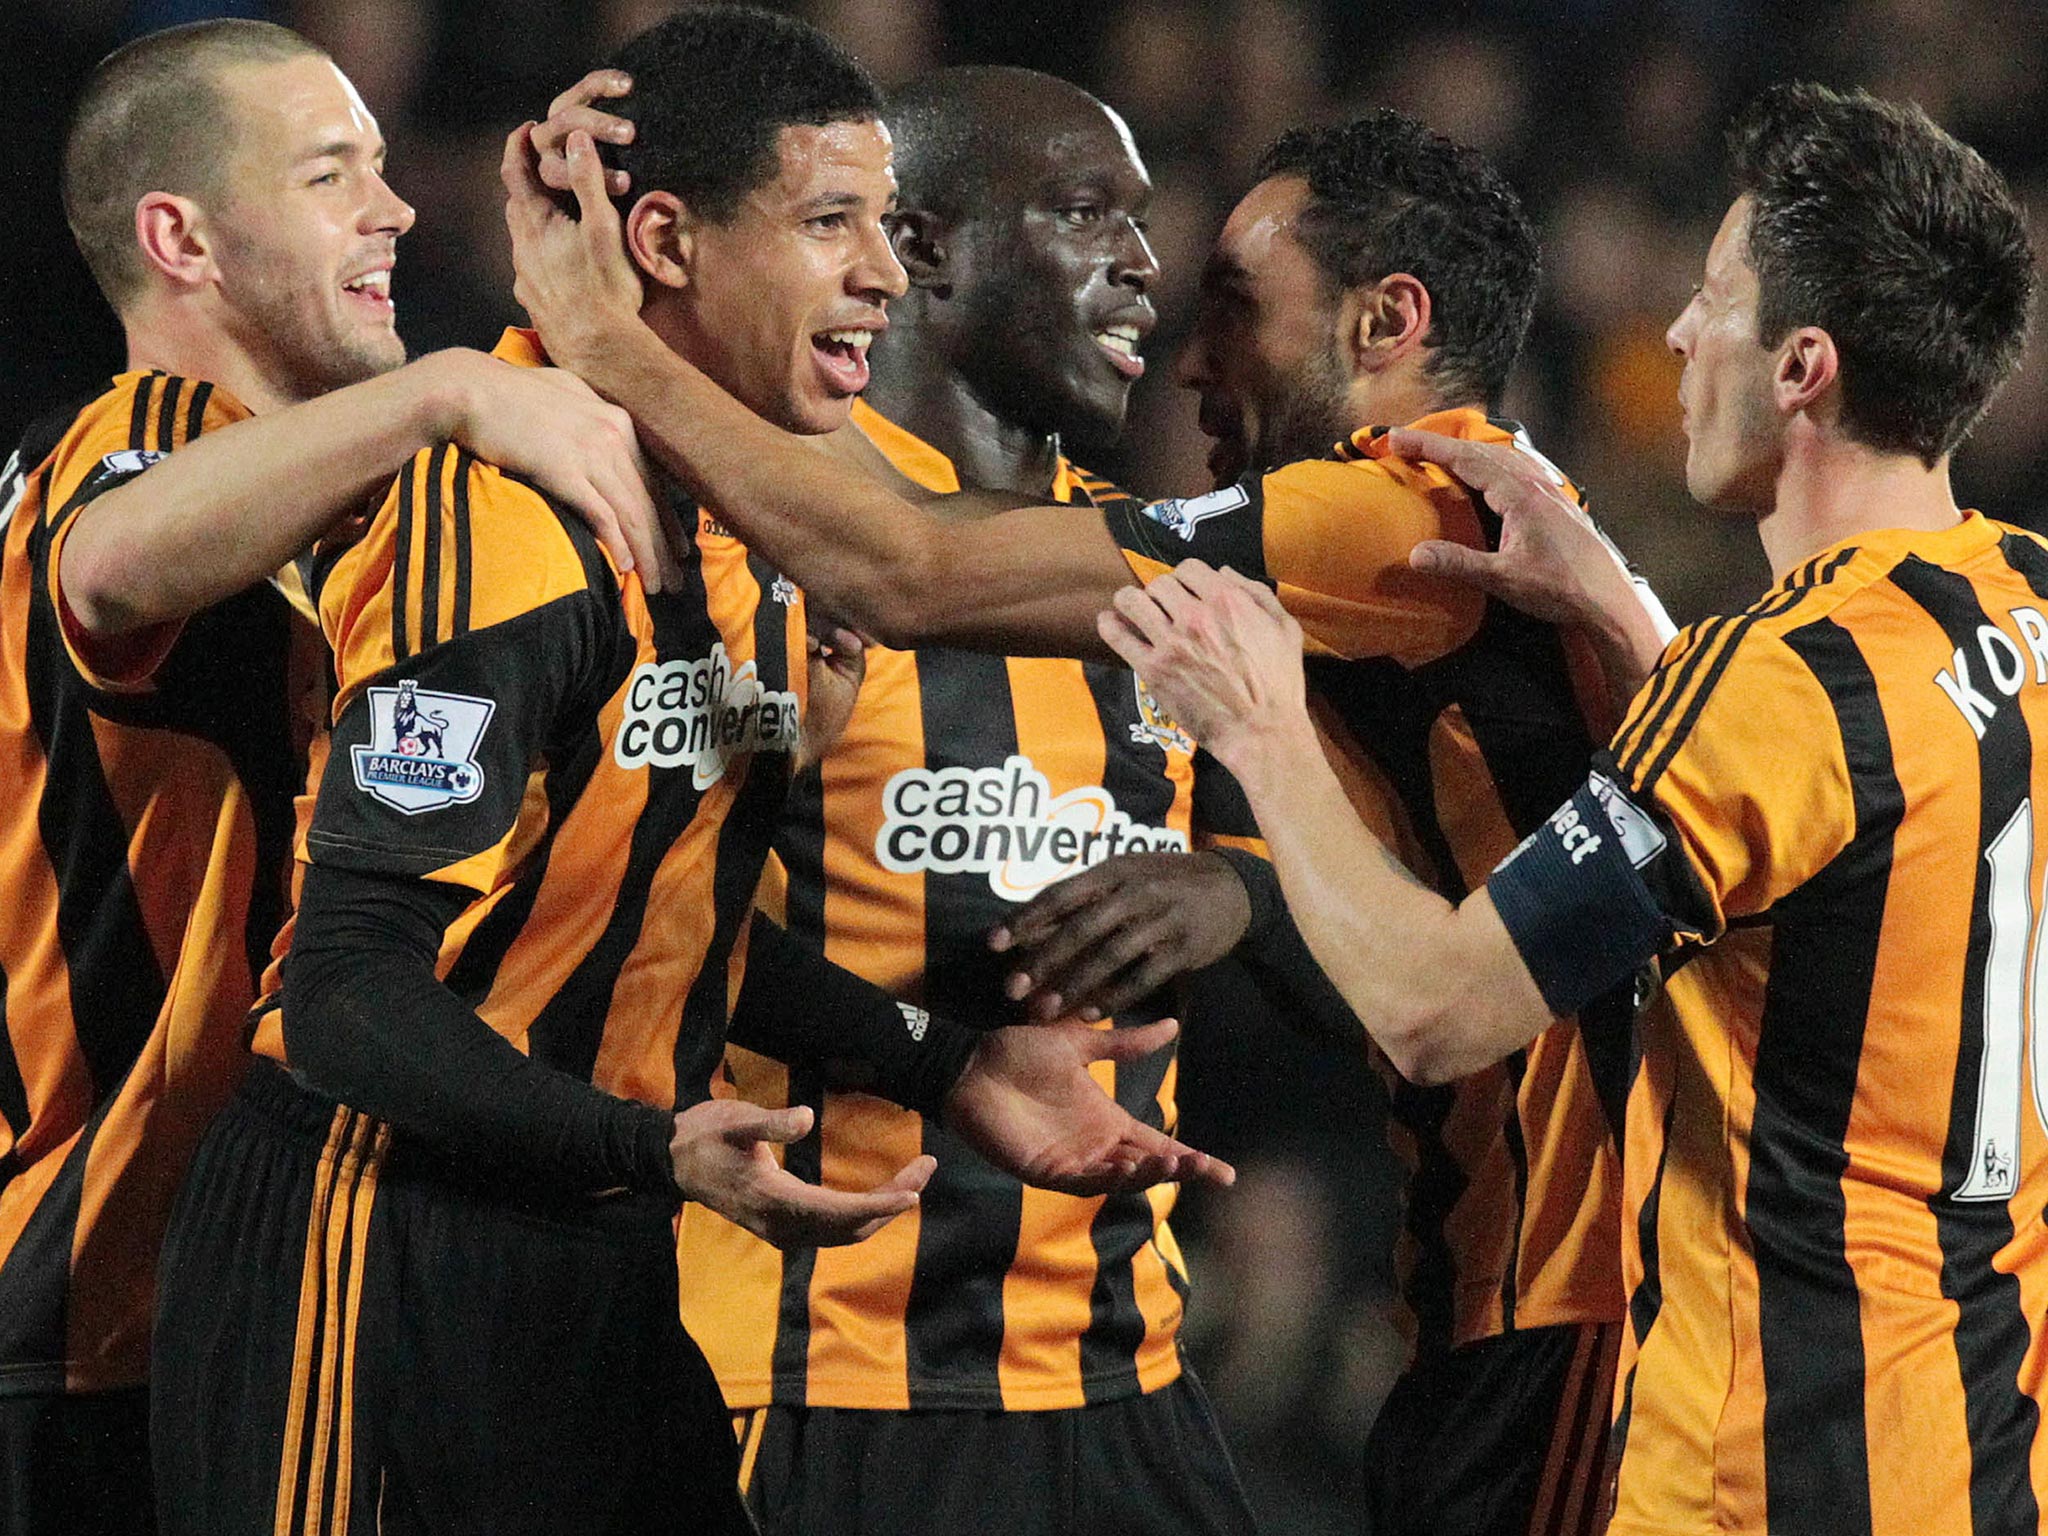 Curtis Davies knows ‘they all count’ after his bizarre goal for Hull City last night